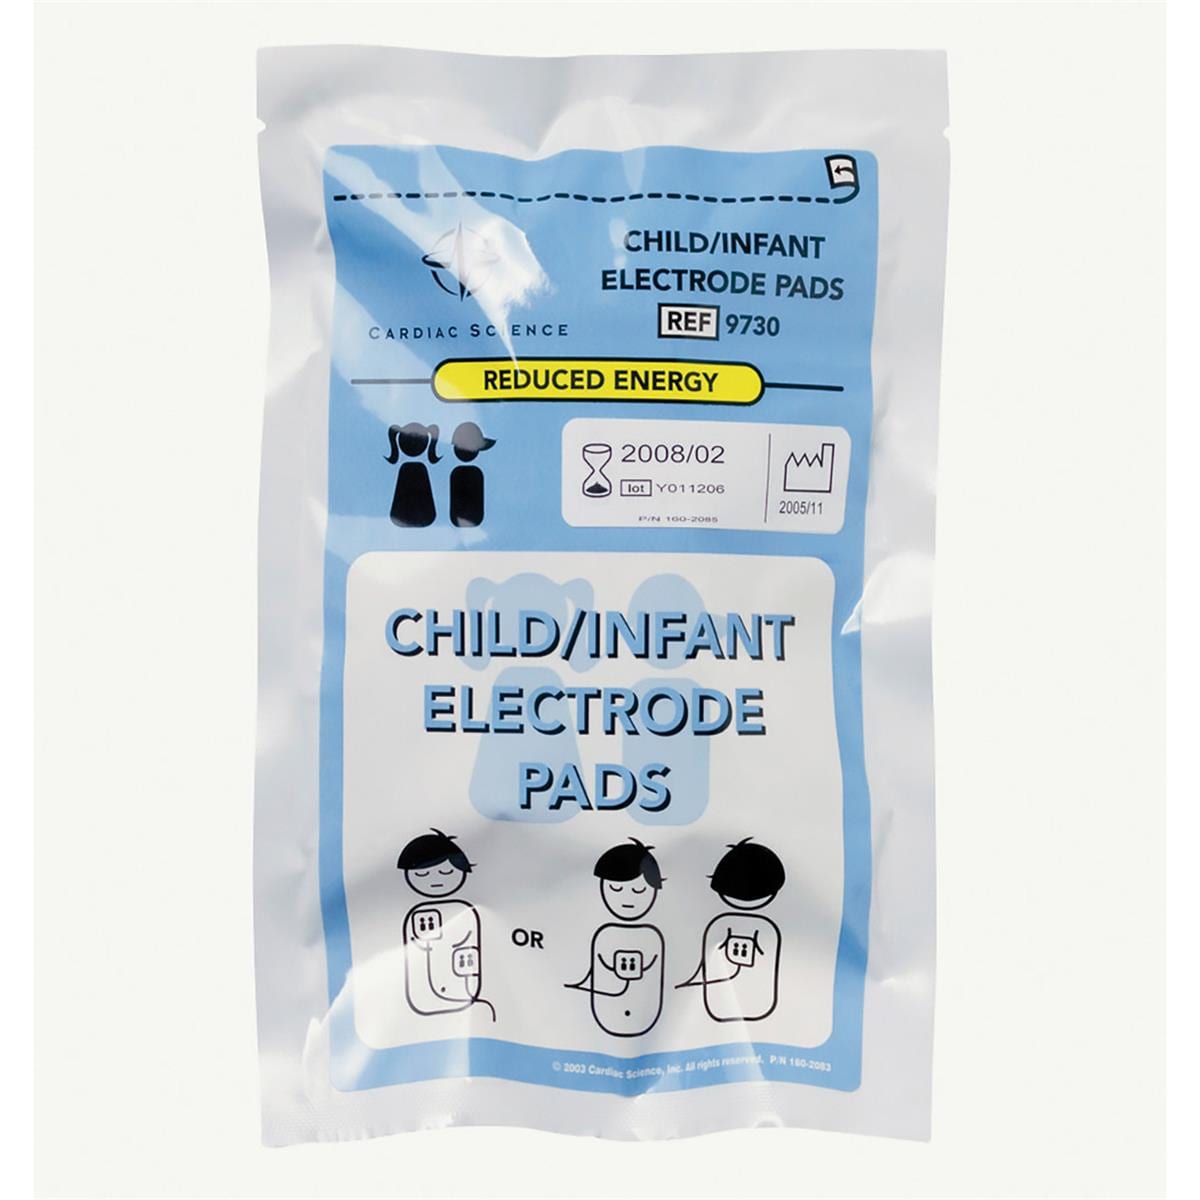 Powerheart AED G3 Electrode Pads Paediatric